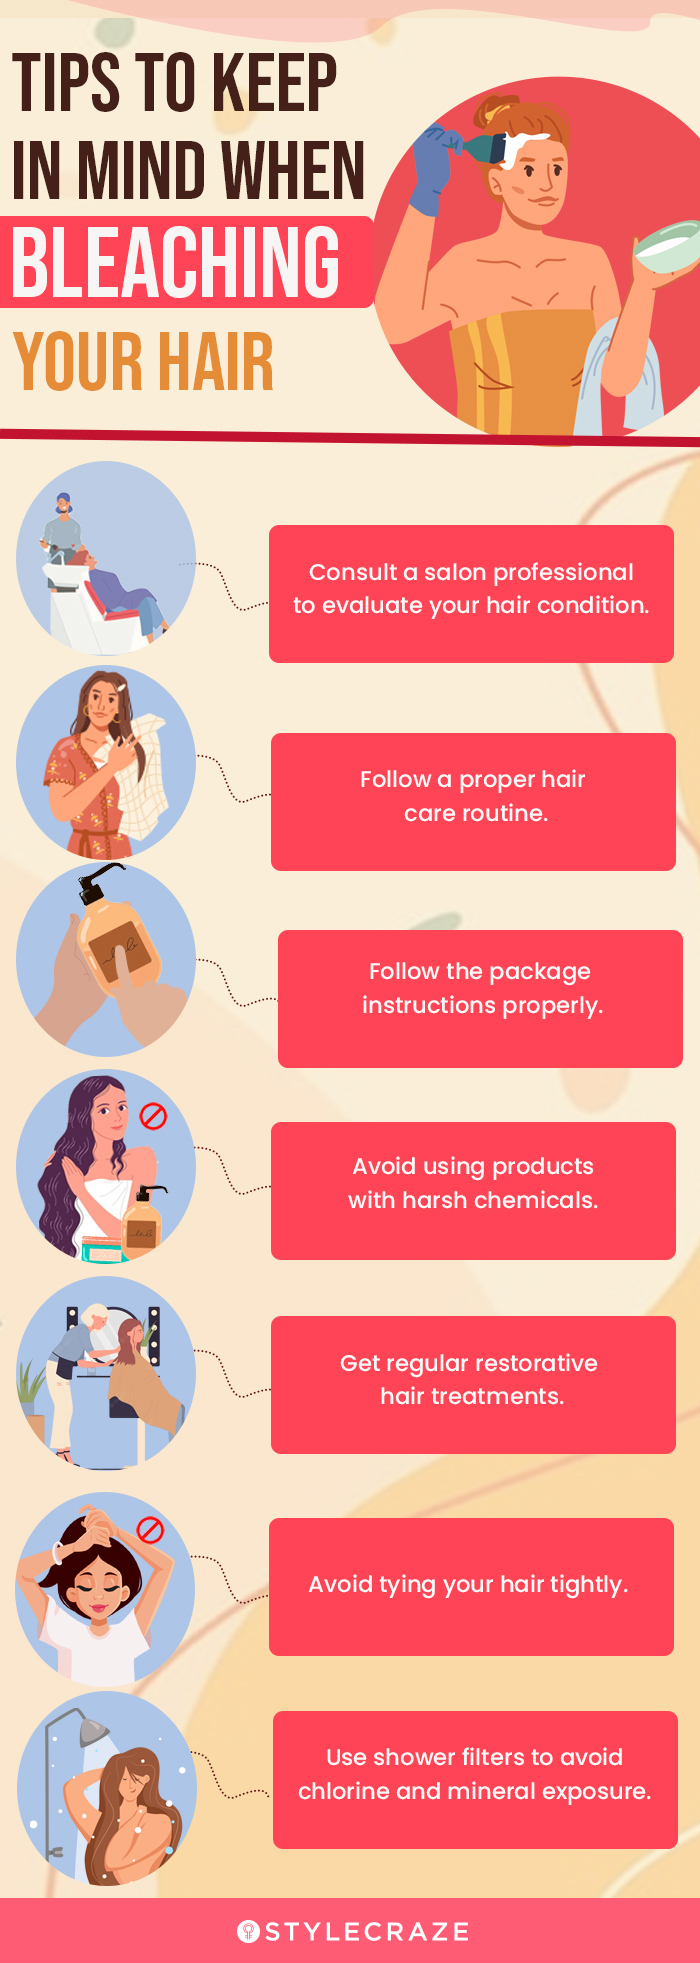 tips to keep in mind when bleaching your hair (infographic)